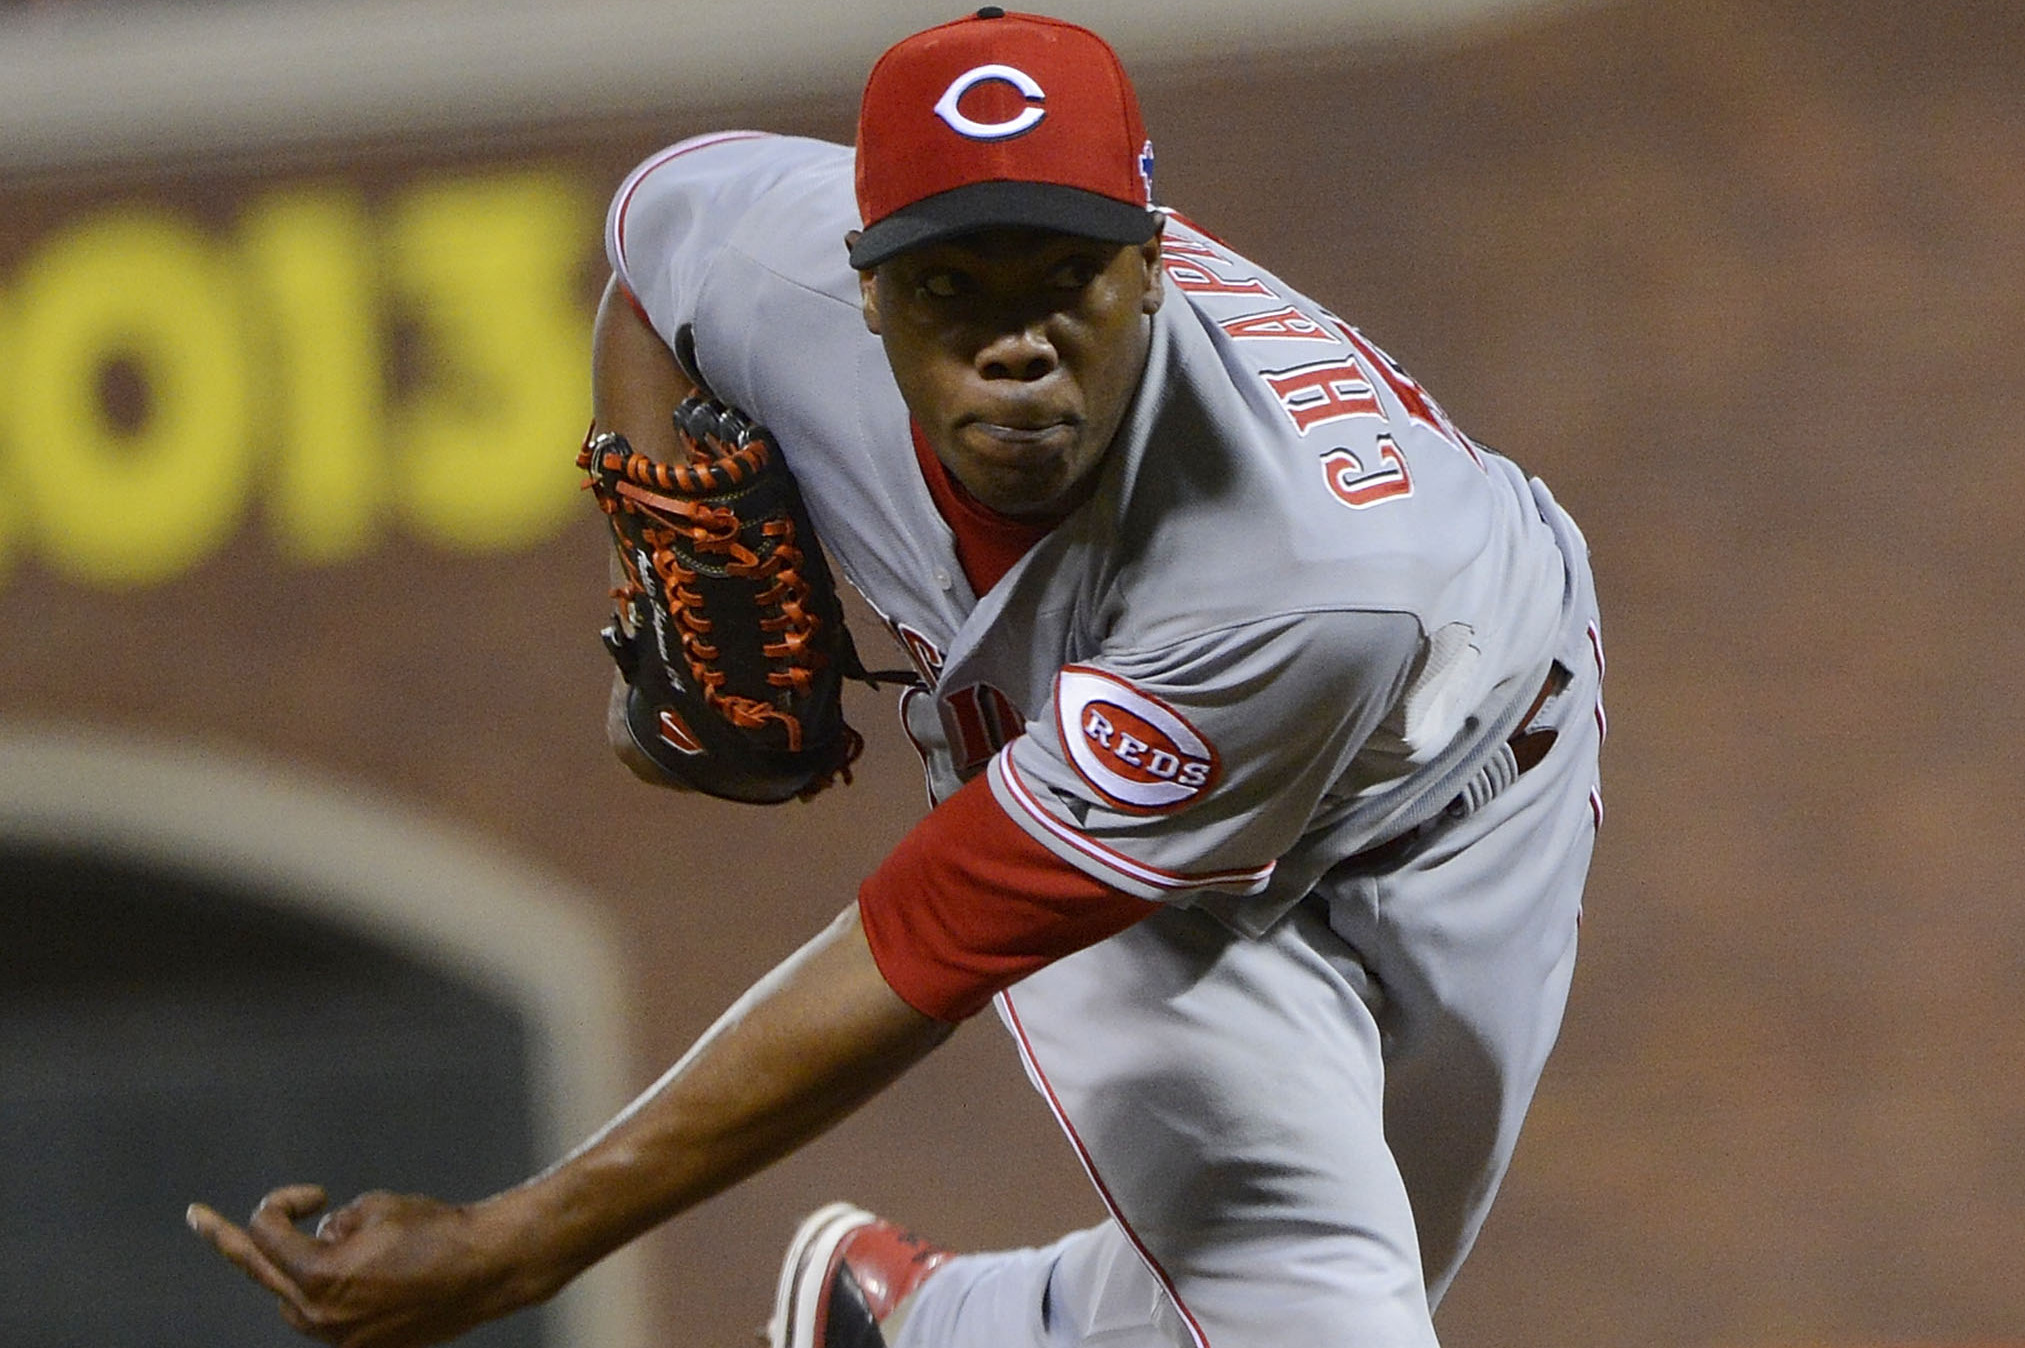 What could the Cincinnati Reds get for Johnny Cueto and Aroldis Chapman?